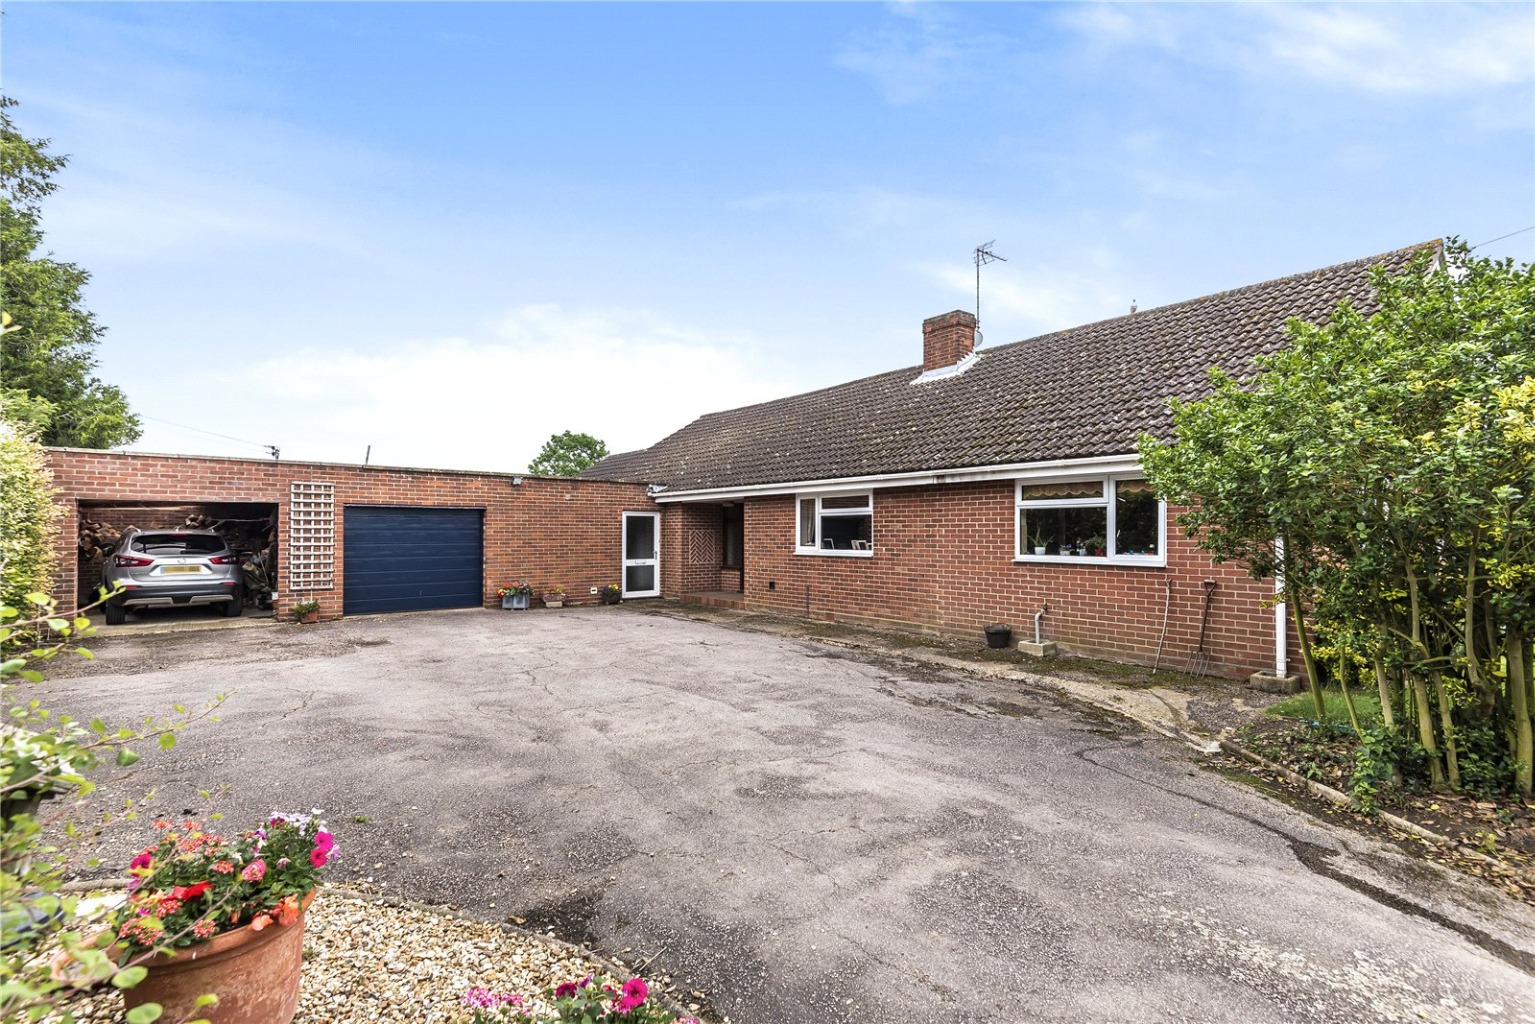 3 bed detached house for sale in Wintringham, St. Neots  - Property Image 2